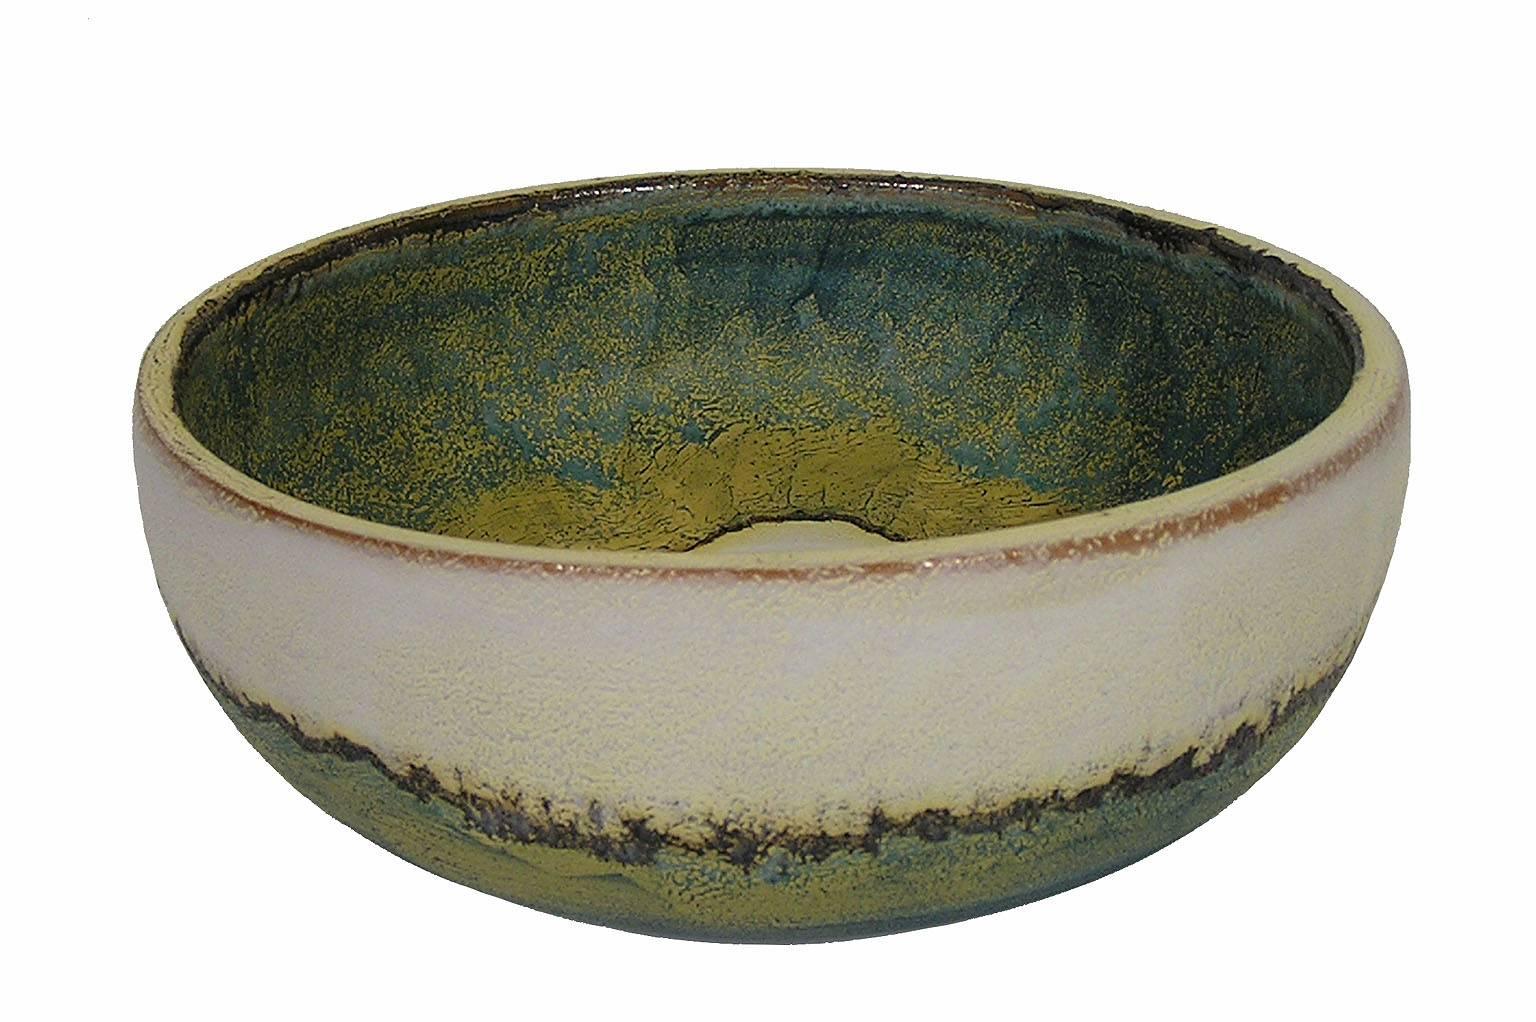 A ceramic pottery bowl from the 1970s by Marcello Fantoni of Italy. Decorated throughout using in multi-toned matte and semi-matte glaze and featuring a beautifully patterned interior. Bowl is signed on the bottom and in excellent condition.